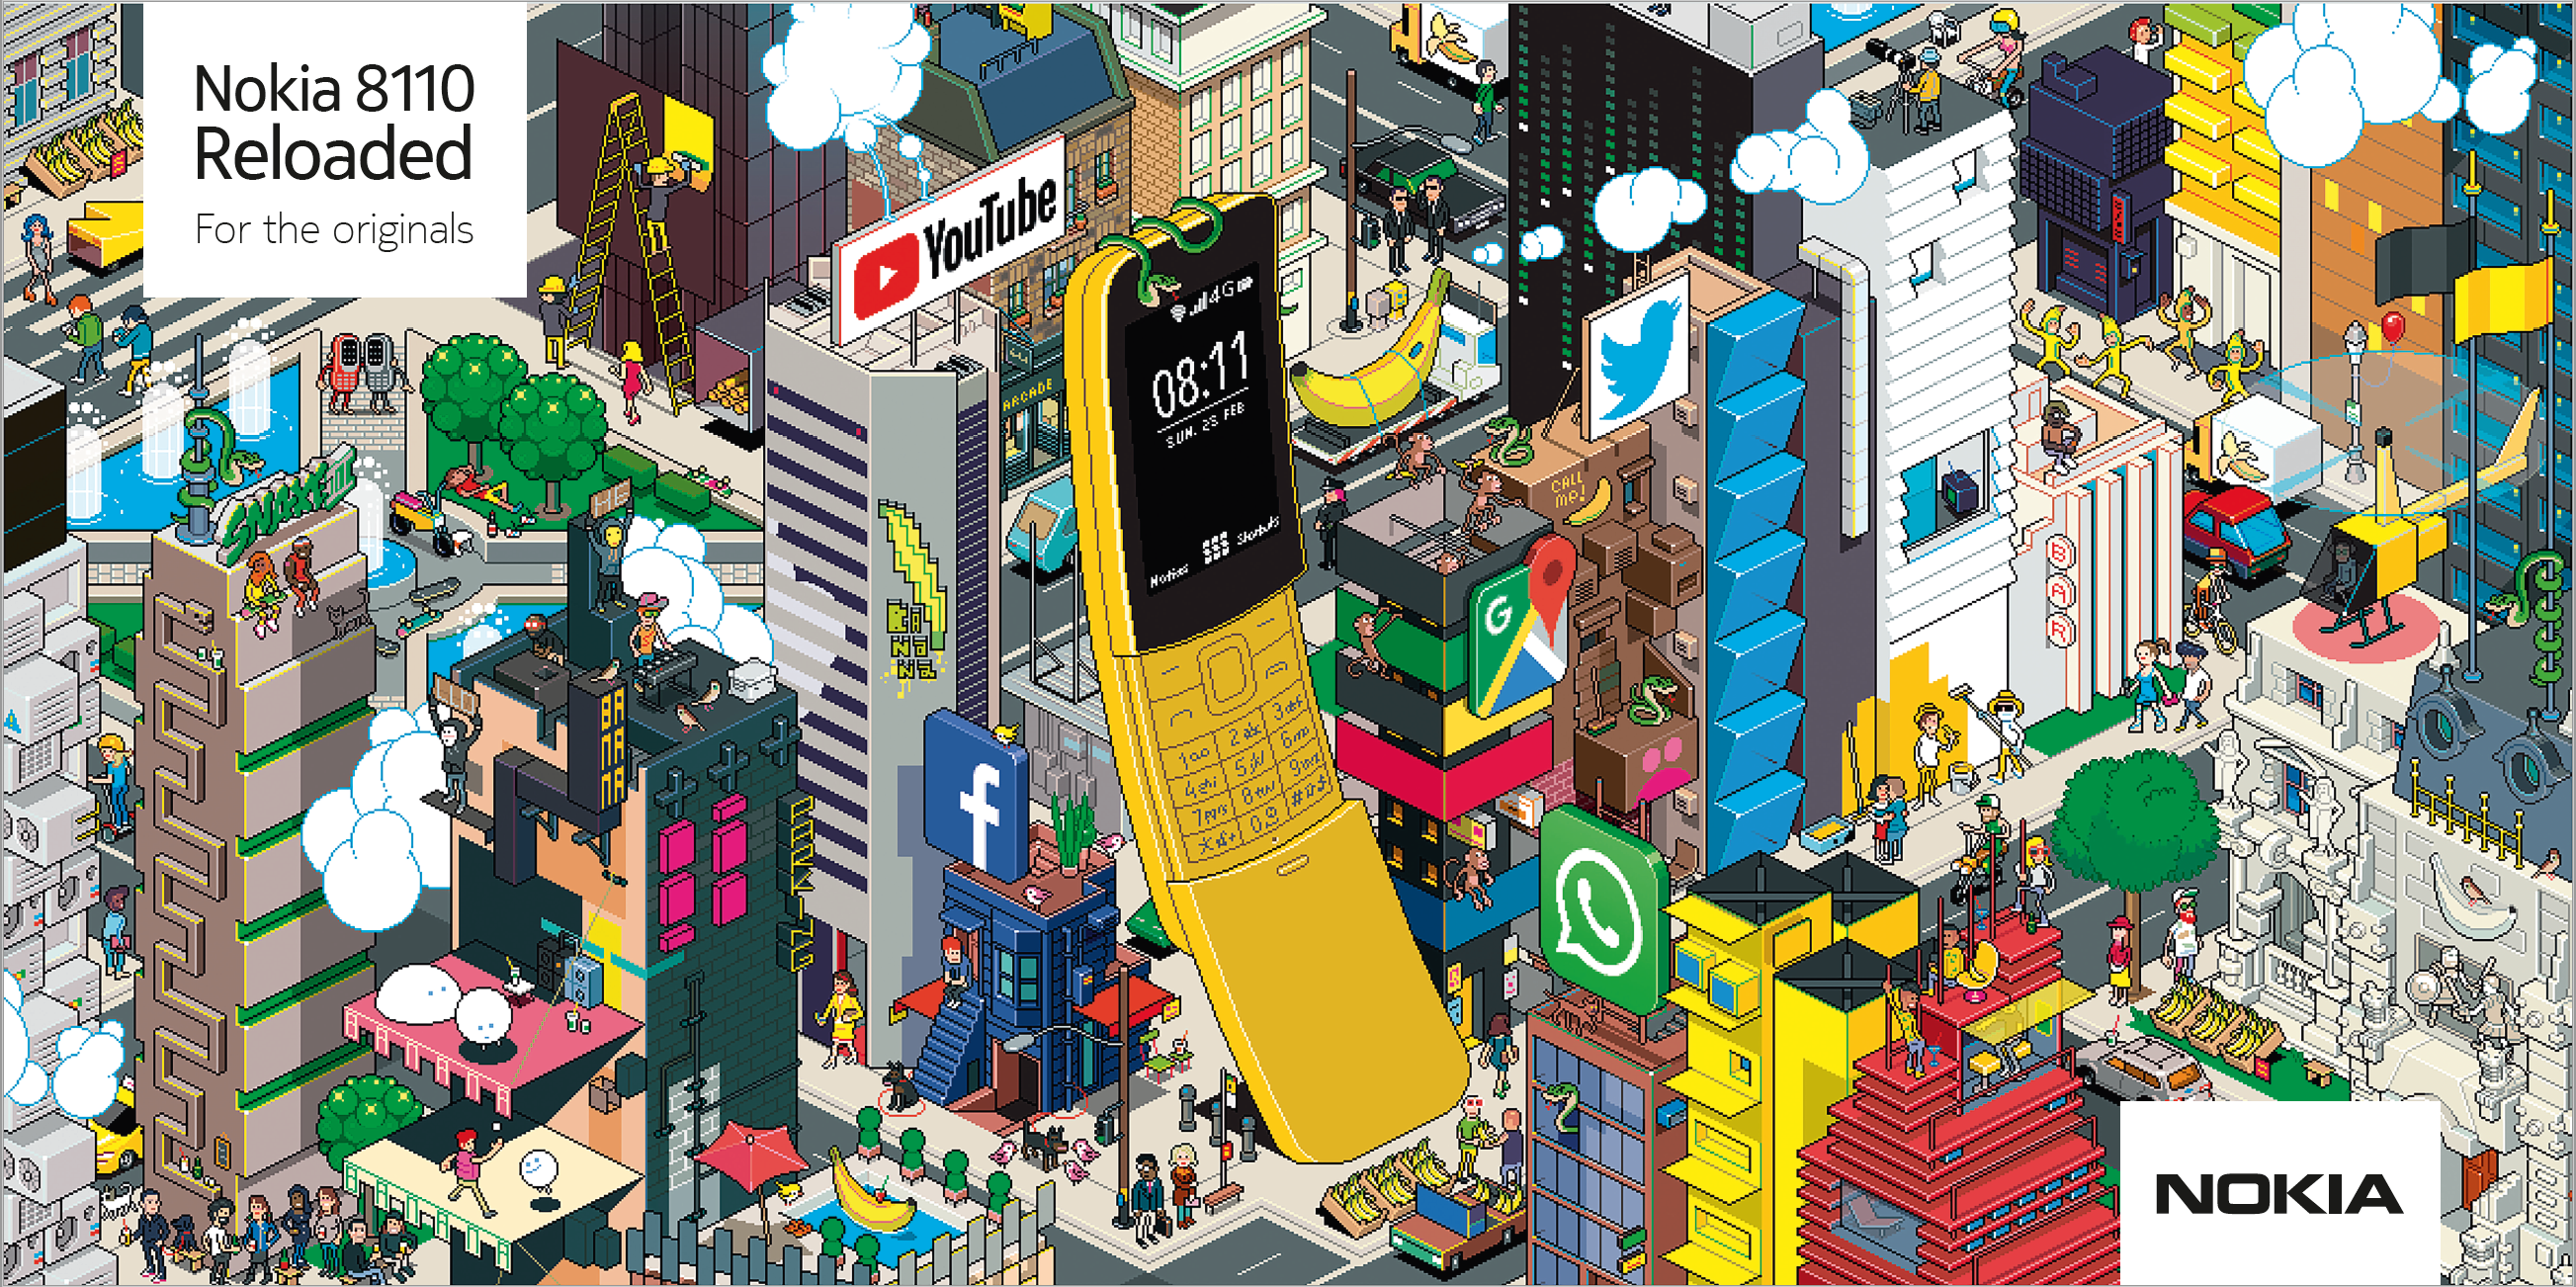 The yellow Nokia 8110 4G is standing upright at the center of a pixelated world. Around it are ad banners for the apps available on the phone. Texts on the upper left say: "Nokia 8110, Reloaded For the originals", with Nokia logo at the bottom right.